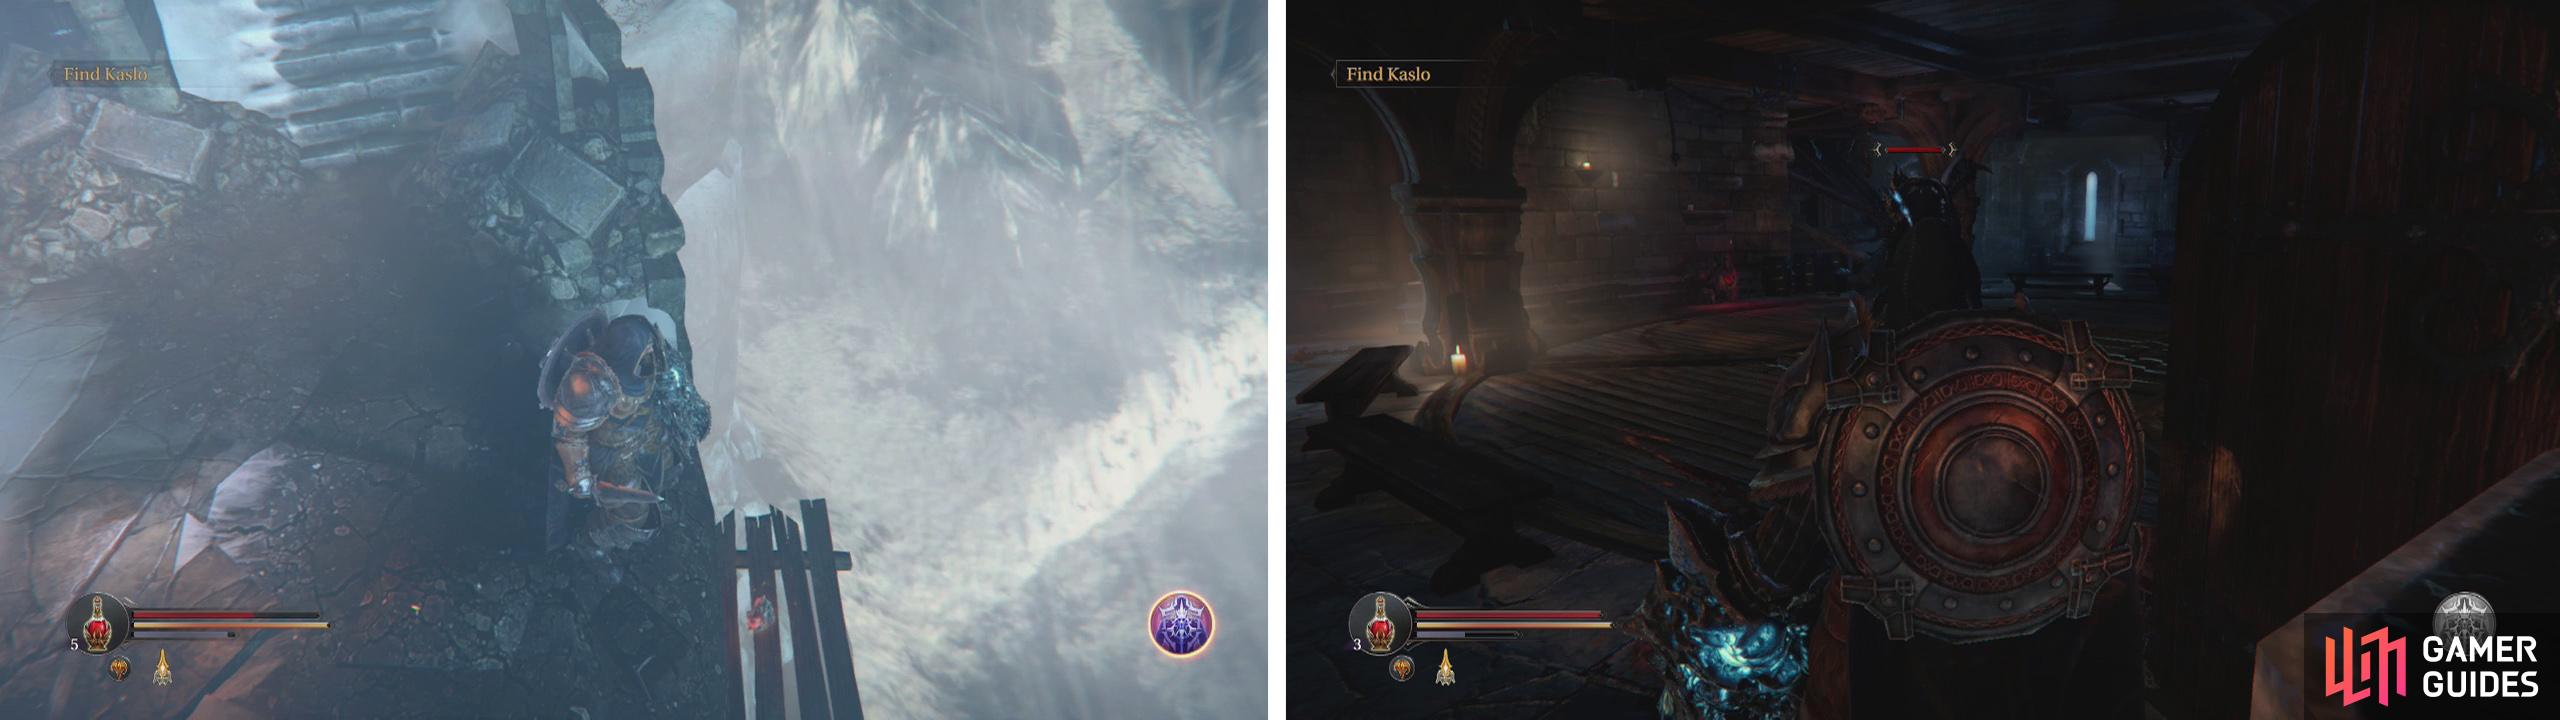 Drop tot he platform with the key from the South Watchtower (left). Fight your way through the enemies until you reach Yetka's Dagger (right).